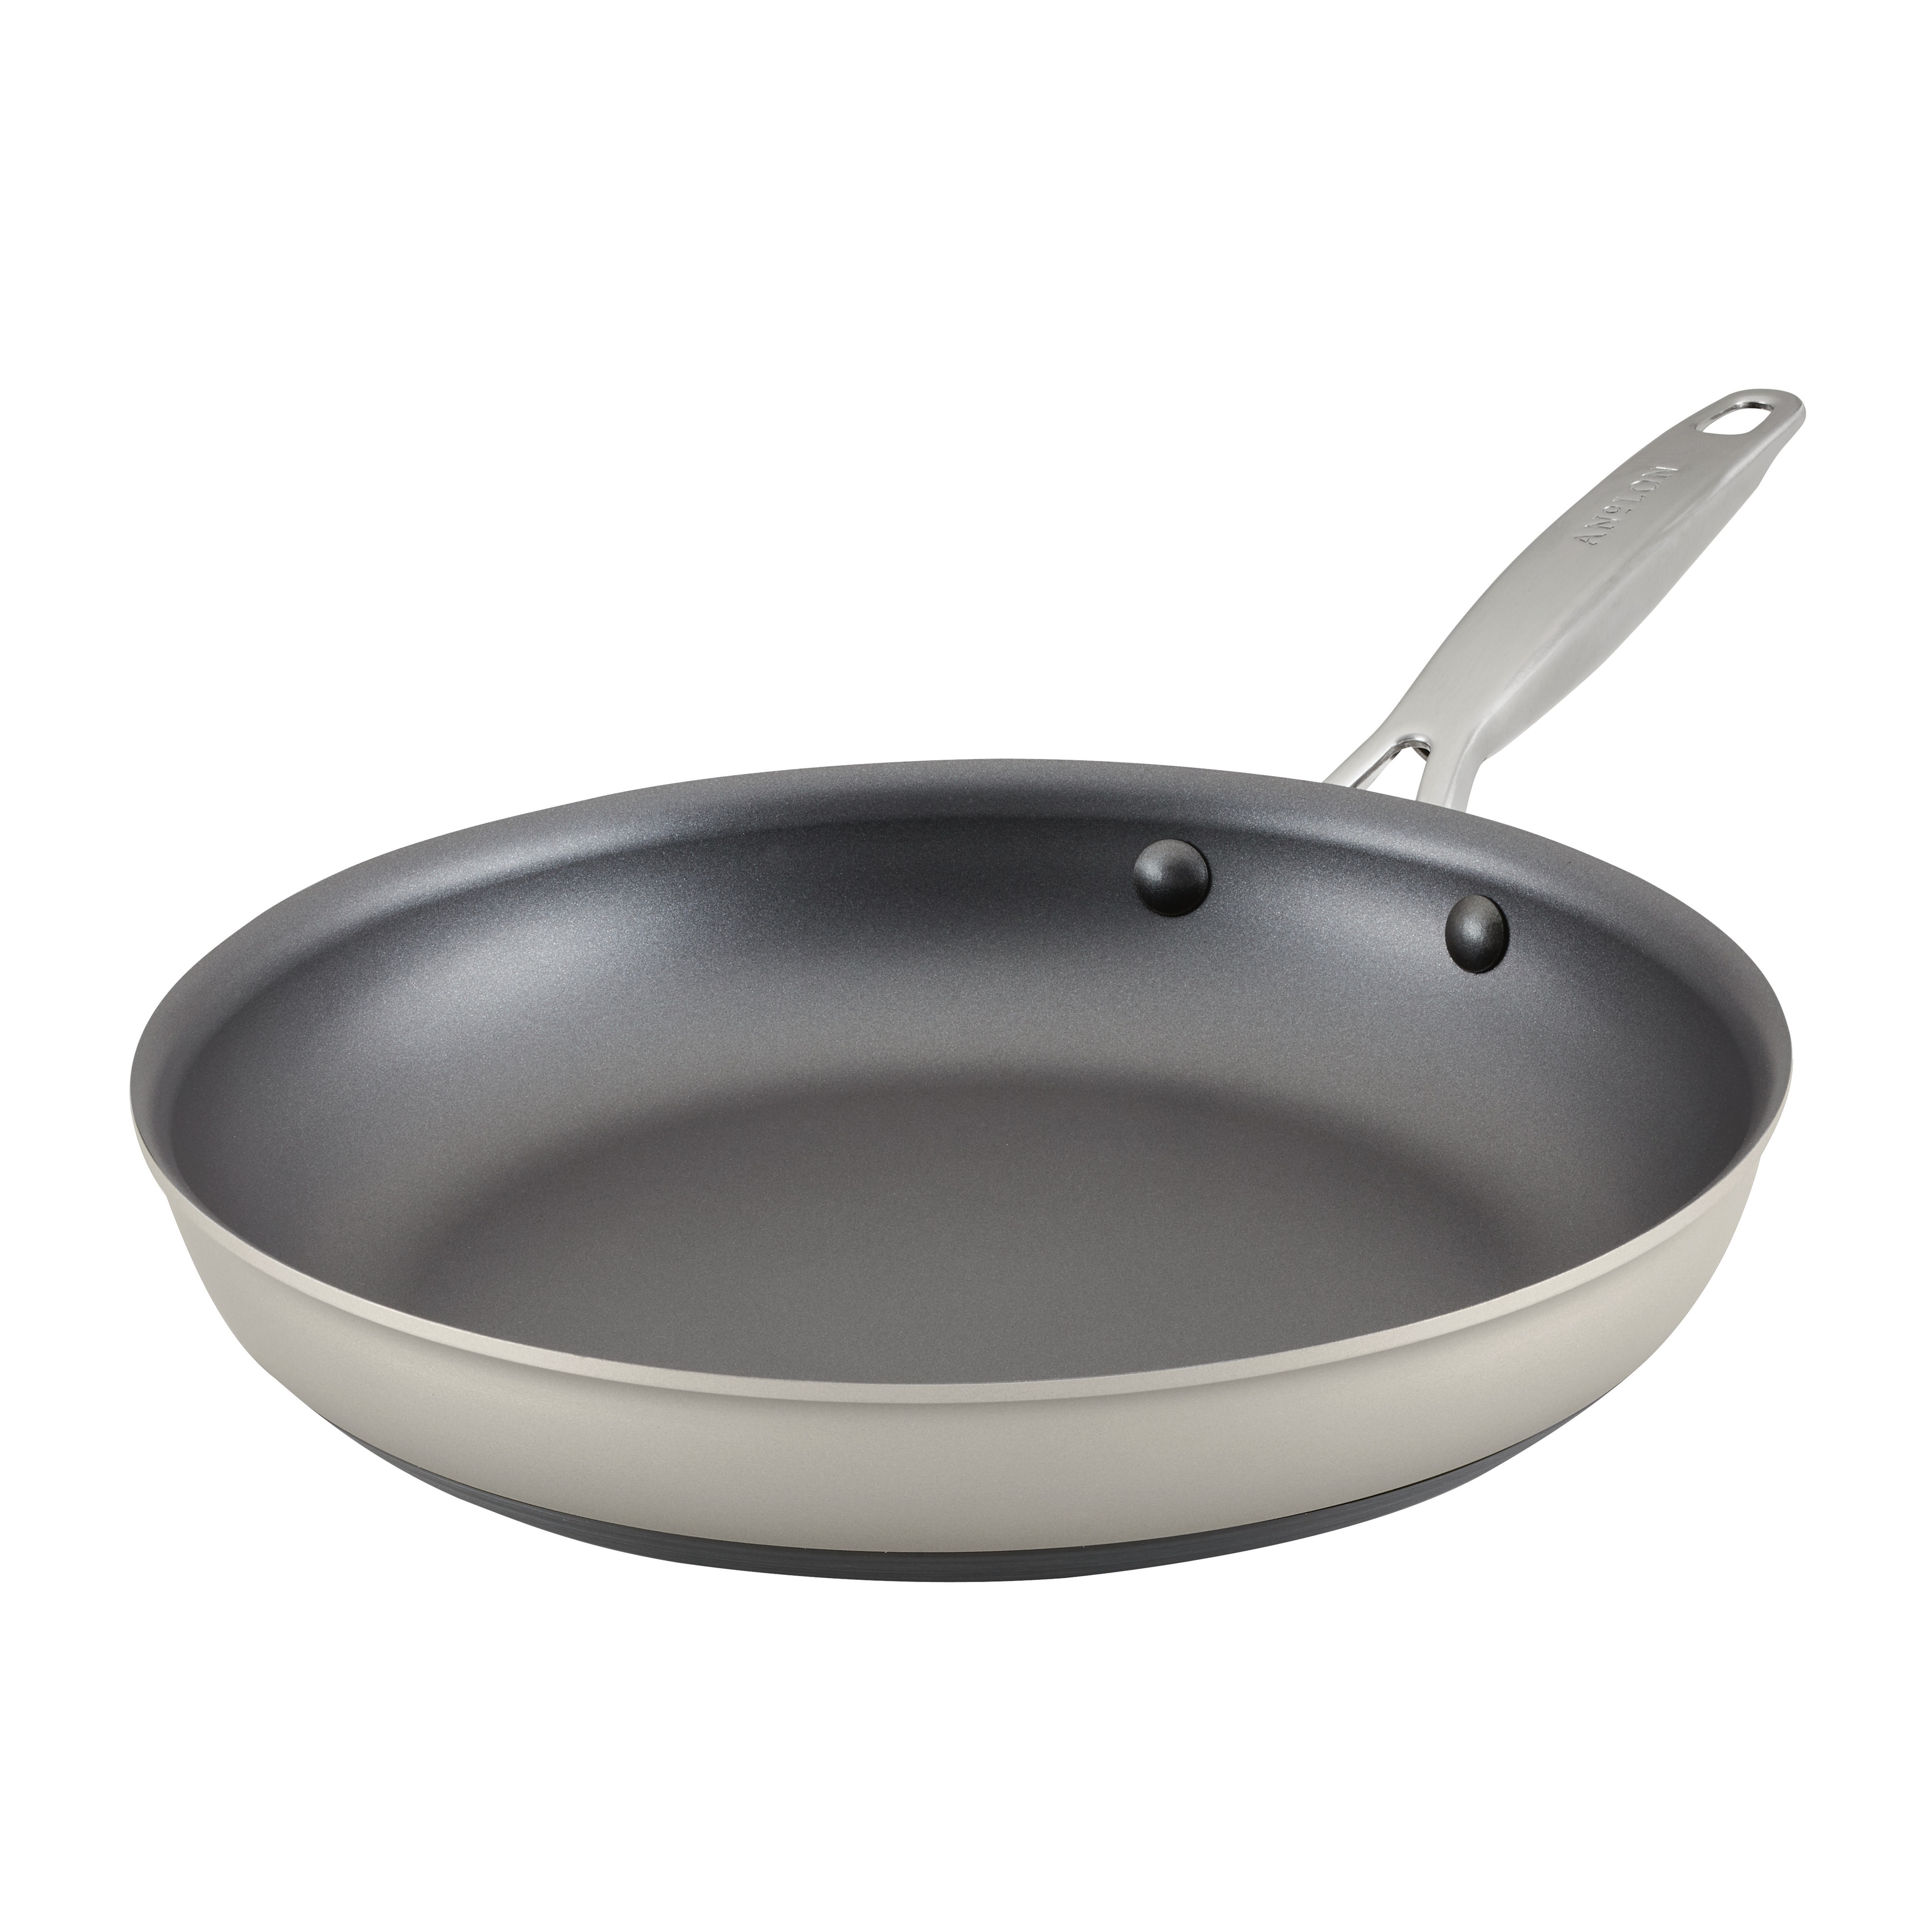 https://ak1.ostkcdn.com/images/products/is/images/direct/740cfb7f68749c3477df76115a73cda66a26486f/Anolon-Achieve-Hard-Anodized-Nonstick-Frying-Pan%2C-12-Inch.jpg